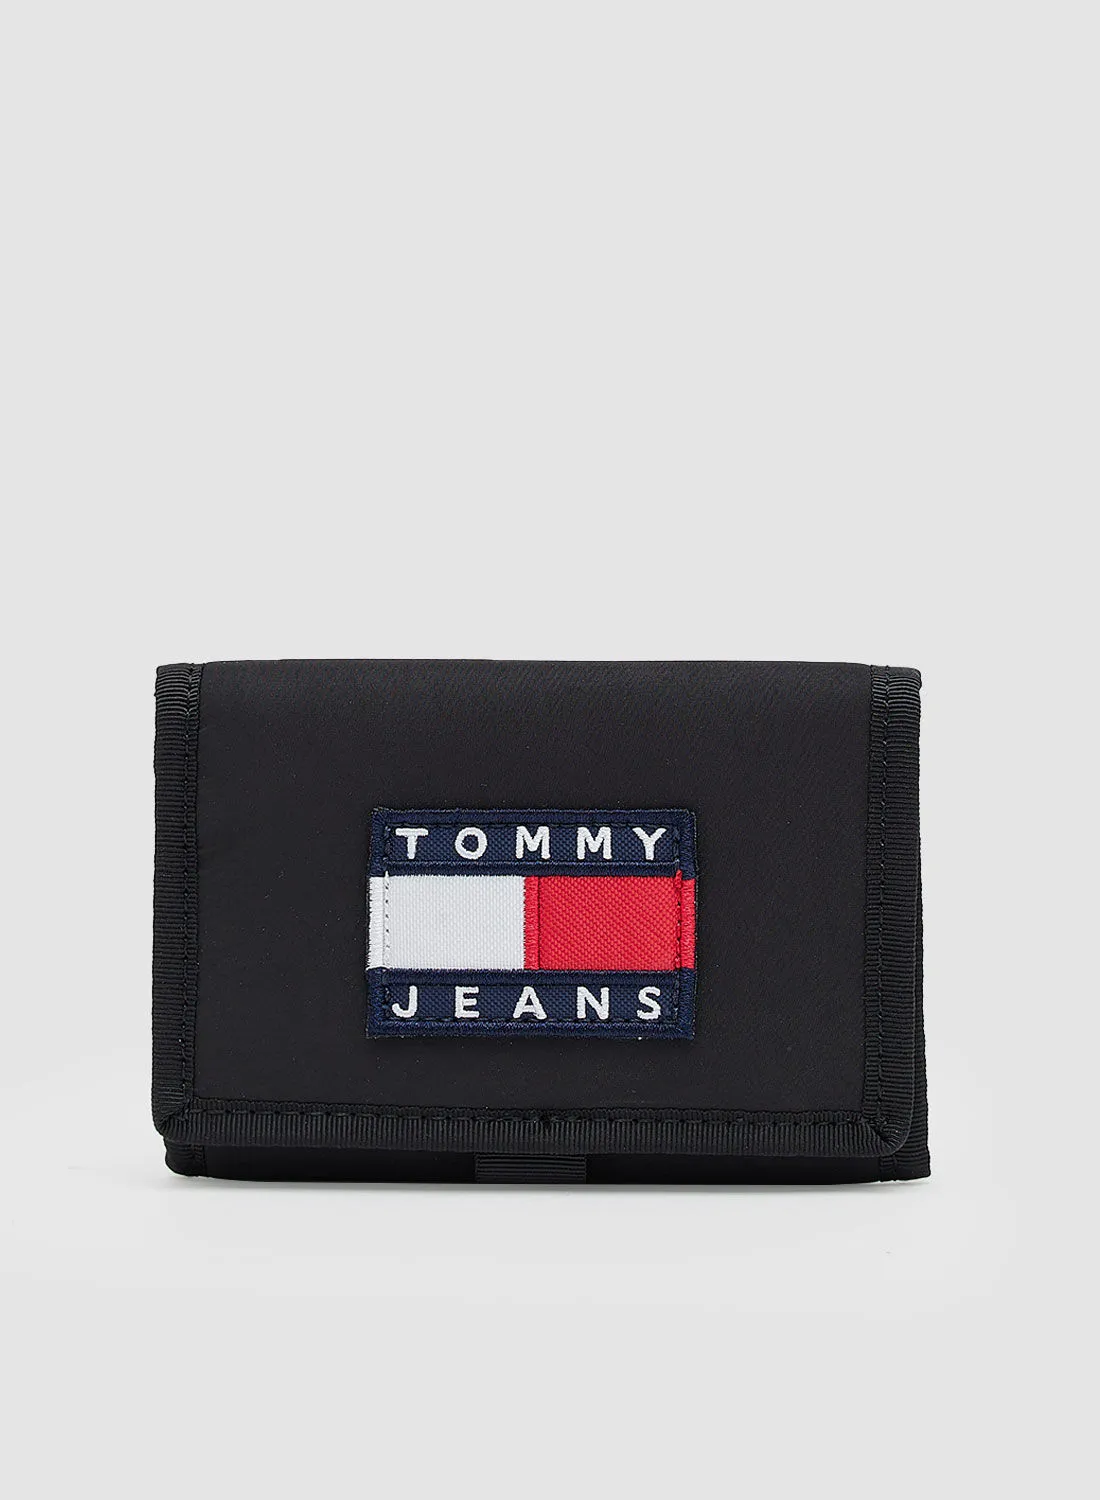 TOMMY JEANS Heritage Trifold Wallet